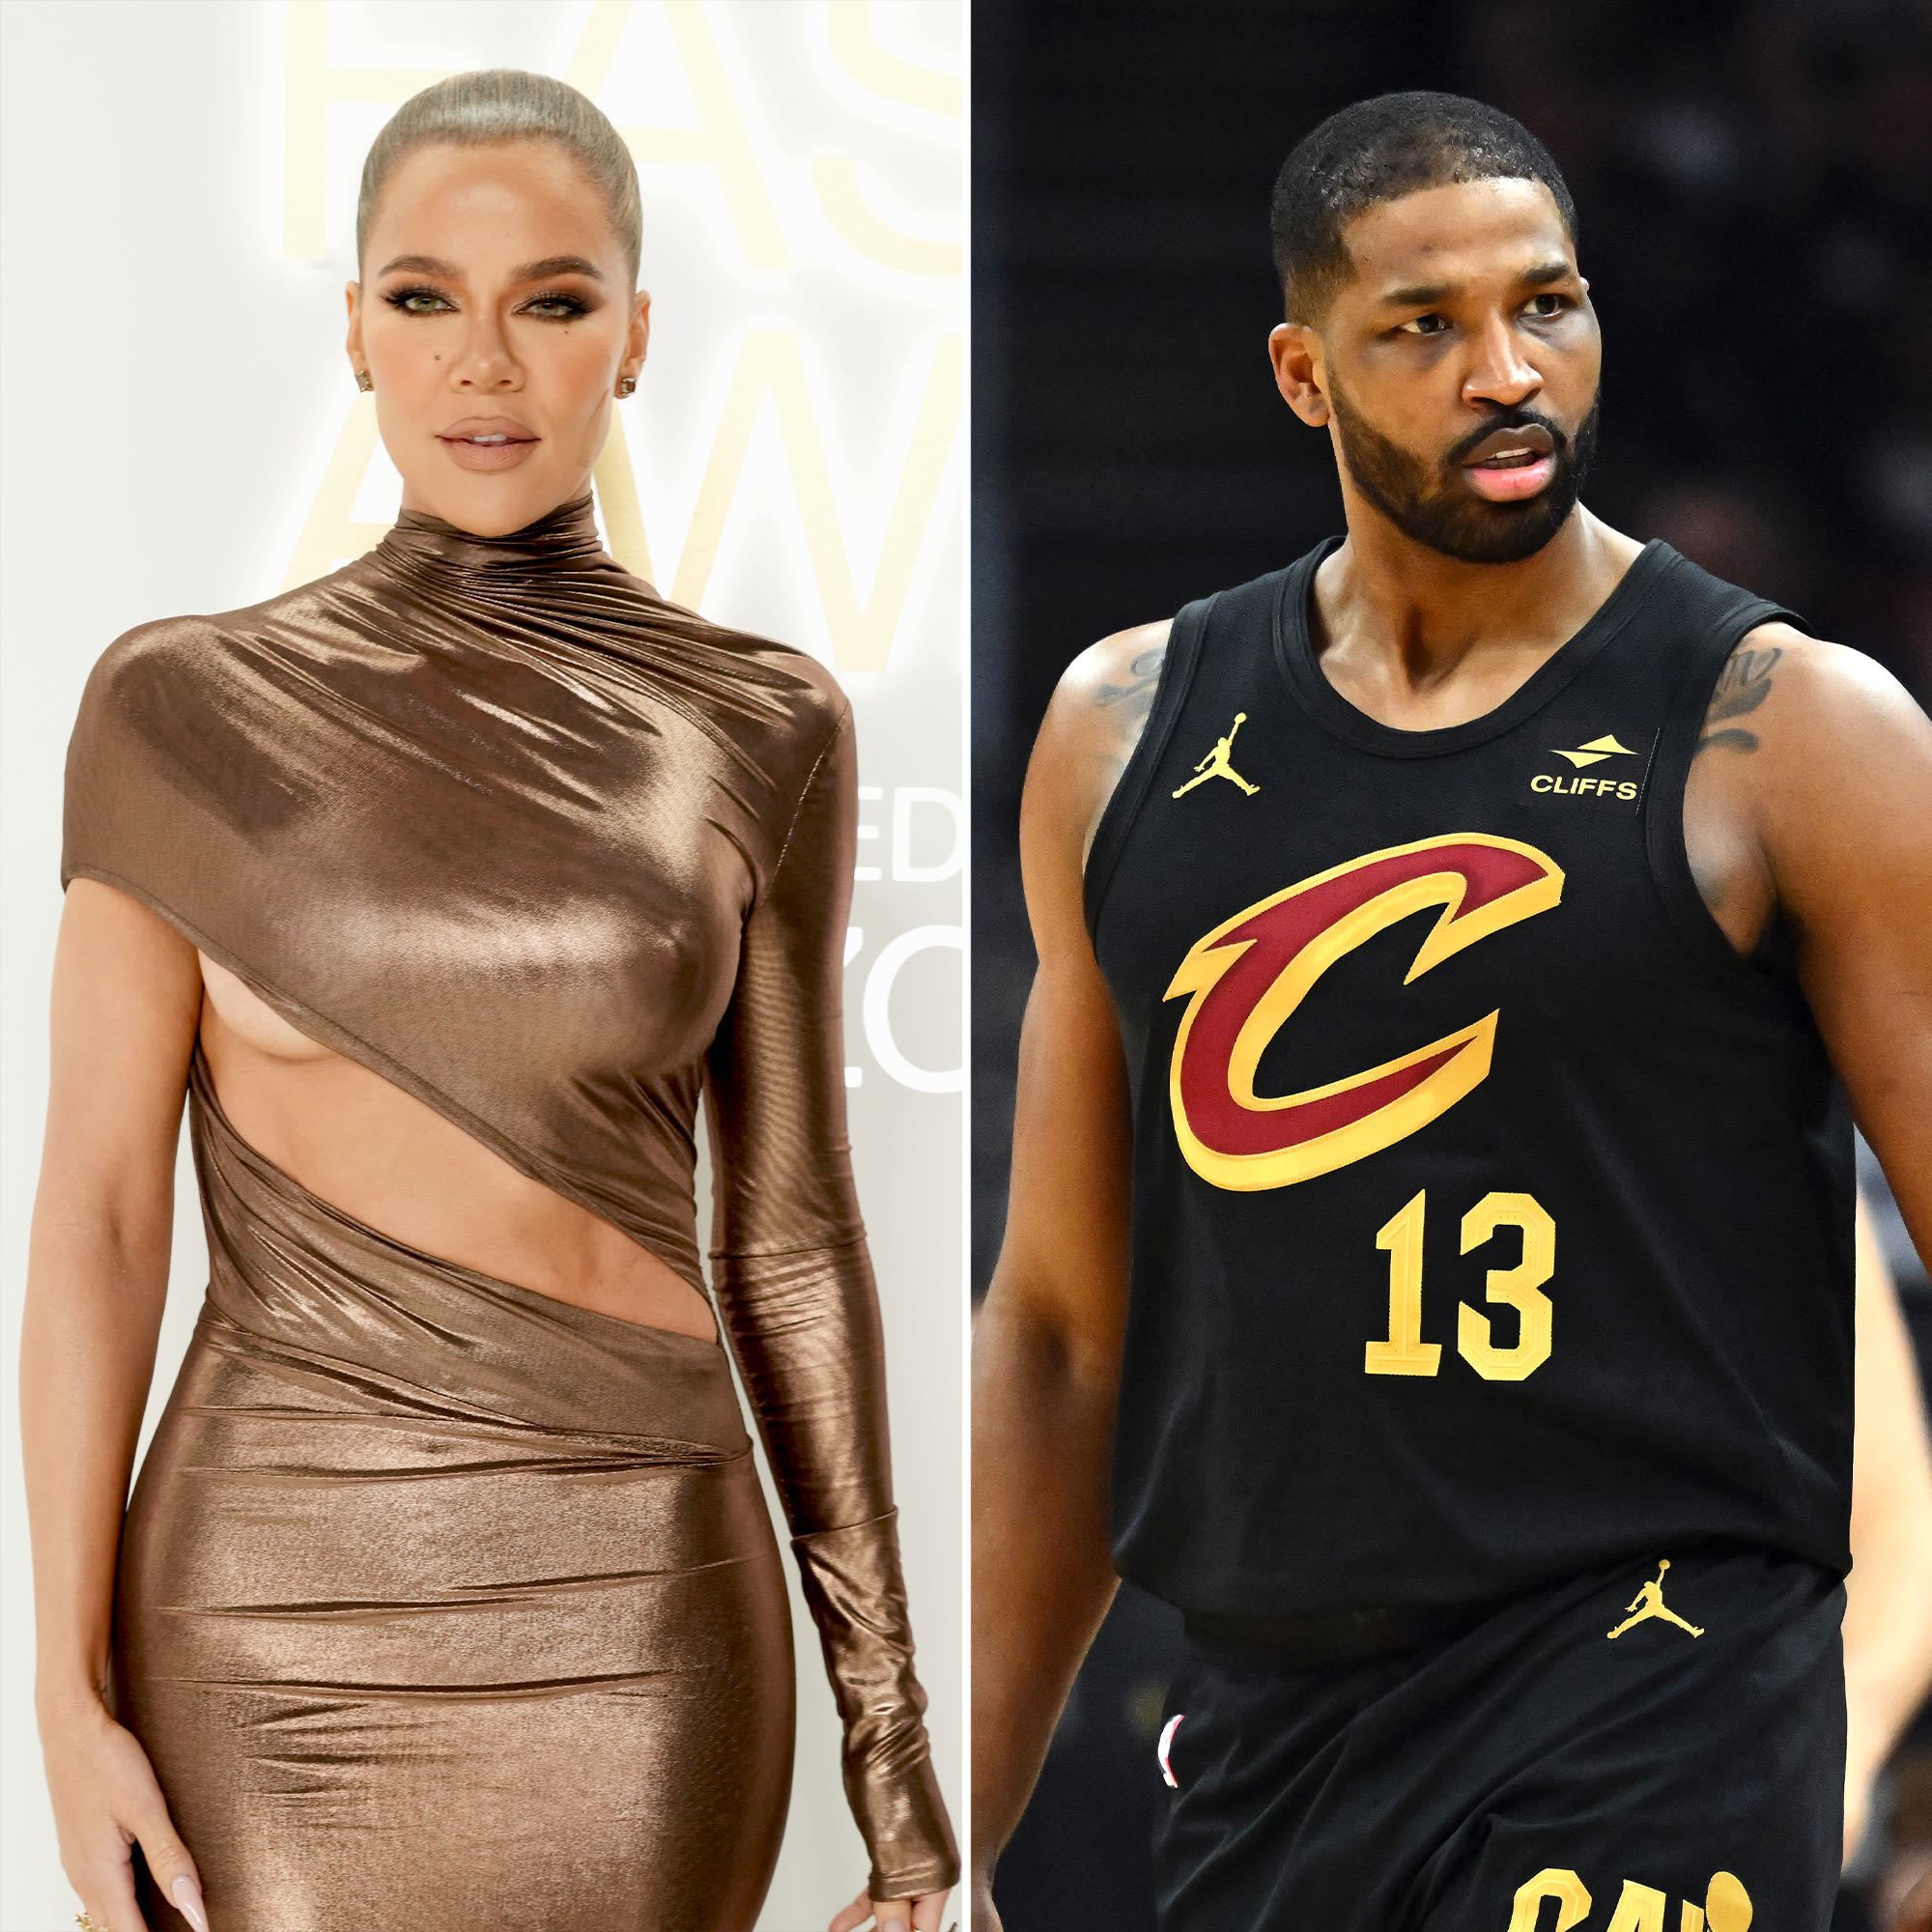 Khloe Kardashian Says She and Ex Tristan Thompson ‘Get Along So Well Now’: ‘I’m Really Grateful’